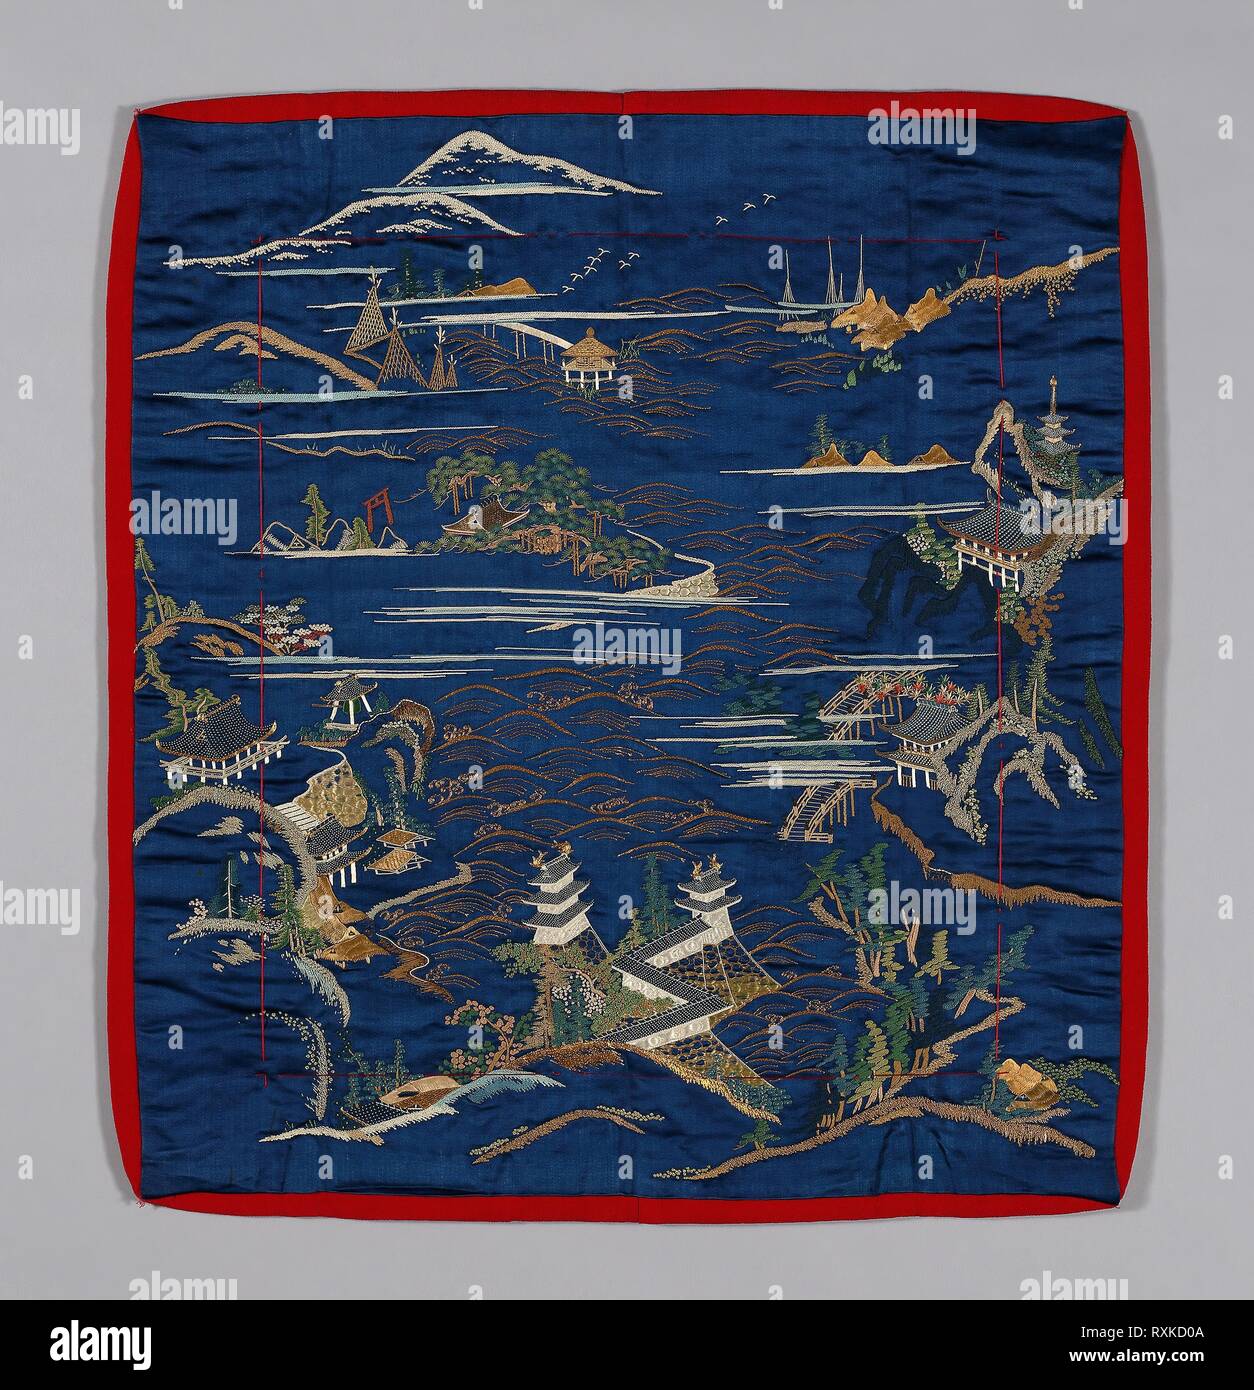 Fukusa (Gift Cover). Japan. Date: 1801-1825. Dimensions: 71.5 x 65.8 cm (28 1/8 x 25 7/8 in.). Patterned side: silk, warp-float faced 4:1 satin weave (shusu); embroidered with silk and gold-leaf-over-lacquered-paper-strip wrapped silk in Chinese knot, satin, single satin, surface satin, stem and straight stitches; paper-strip wrapped cotton padded satin stitches; laidwork and couching; painted India ink (sumi) details  Lined (re-lined) with silk, plain weave with creped wefts (chirimen); interlined with cotton; plain weave; padded with waste silk  Sewn with padded lining extending beyond front Stock Photo